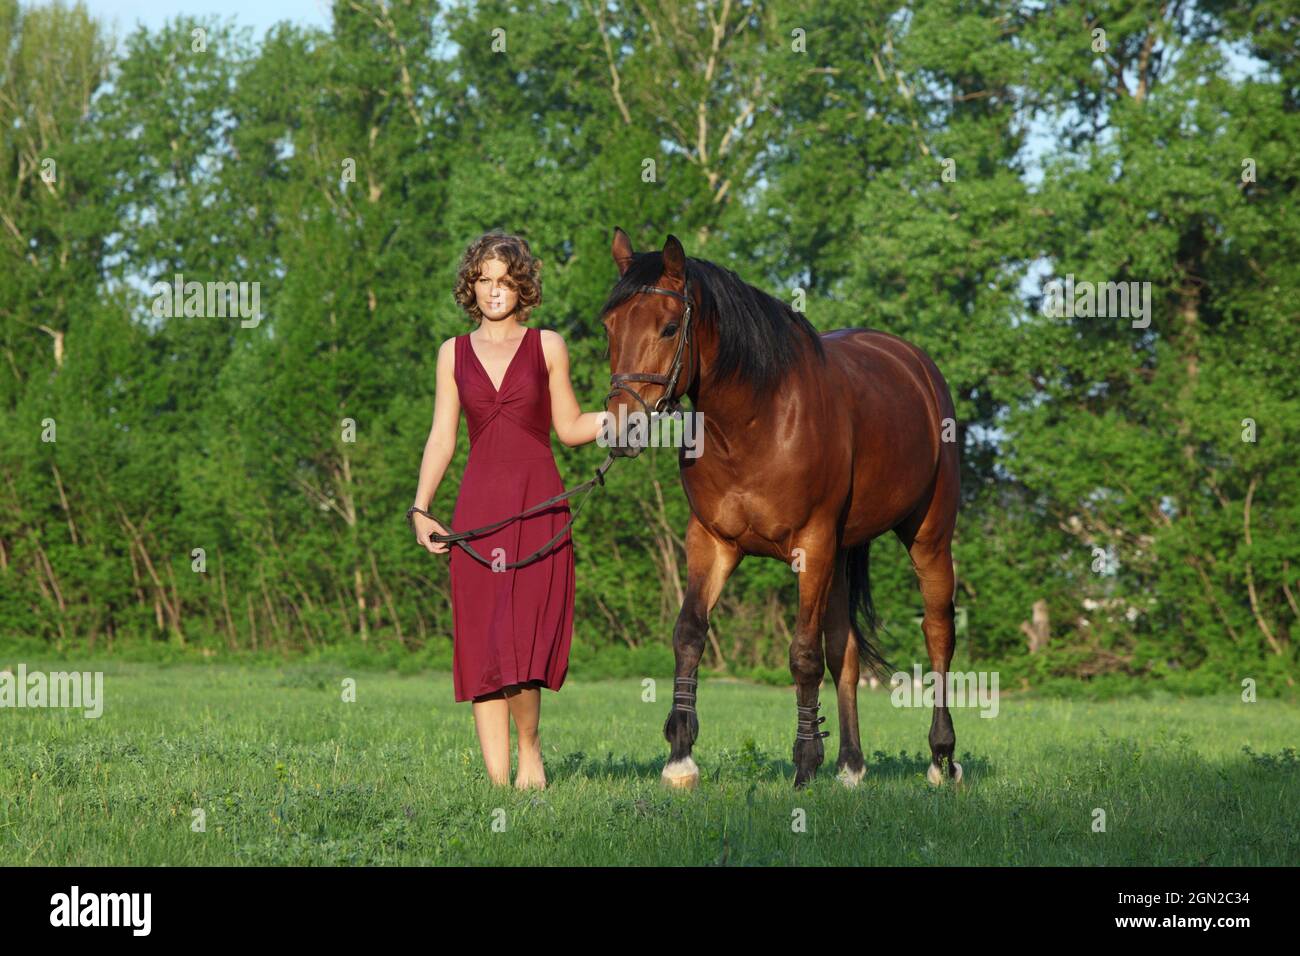 Outdoor portrait of young beautiful woman in the red dress with leading dressage horse. Stock Photo